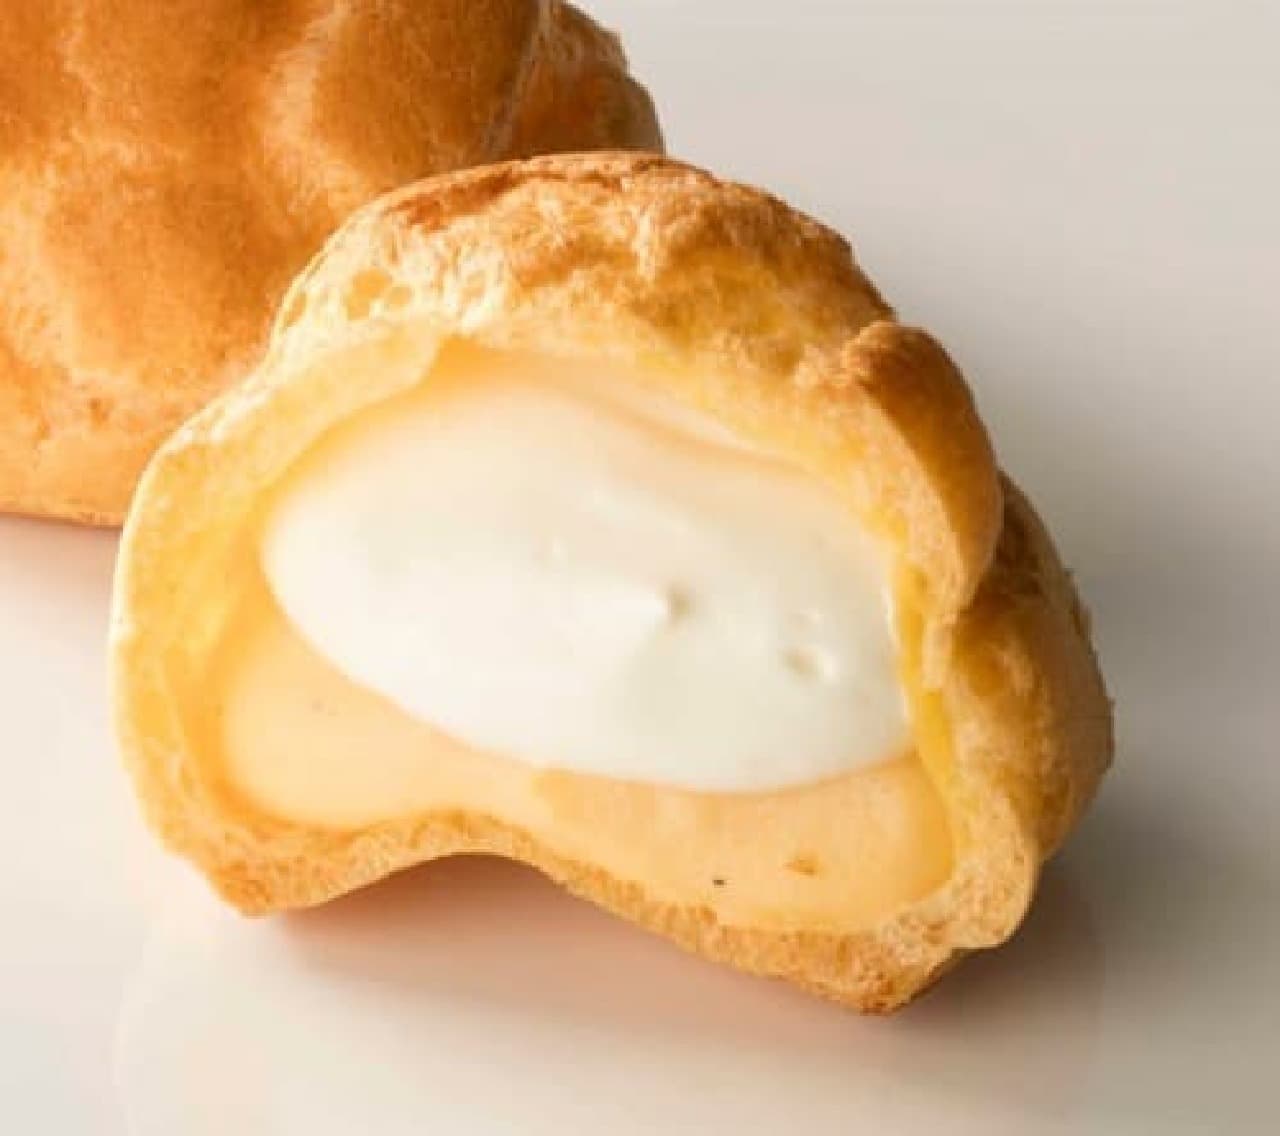 Chateraise "Double Cream Puffs"